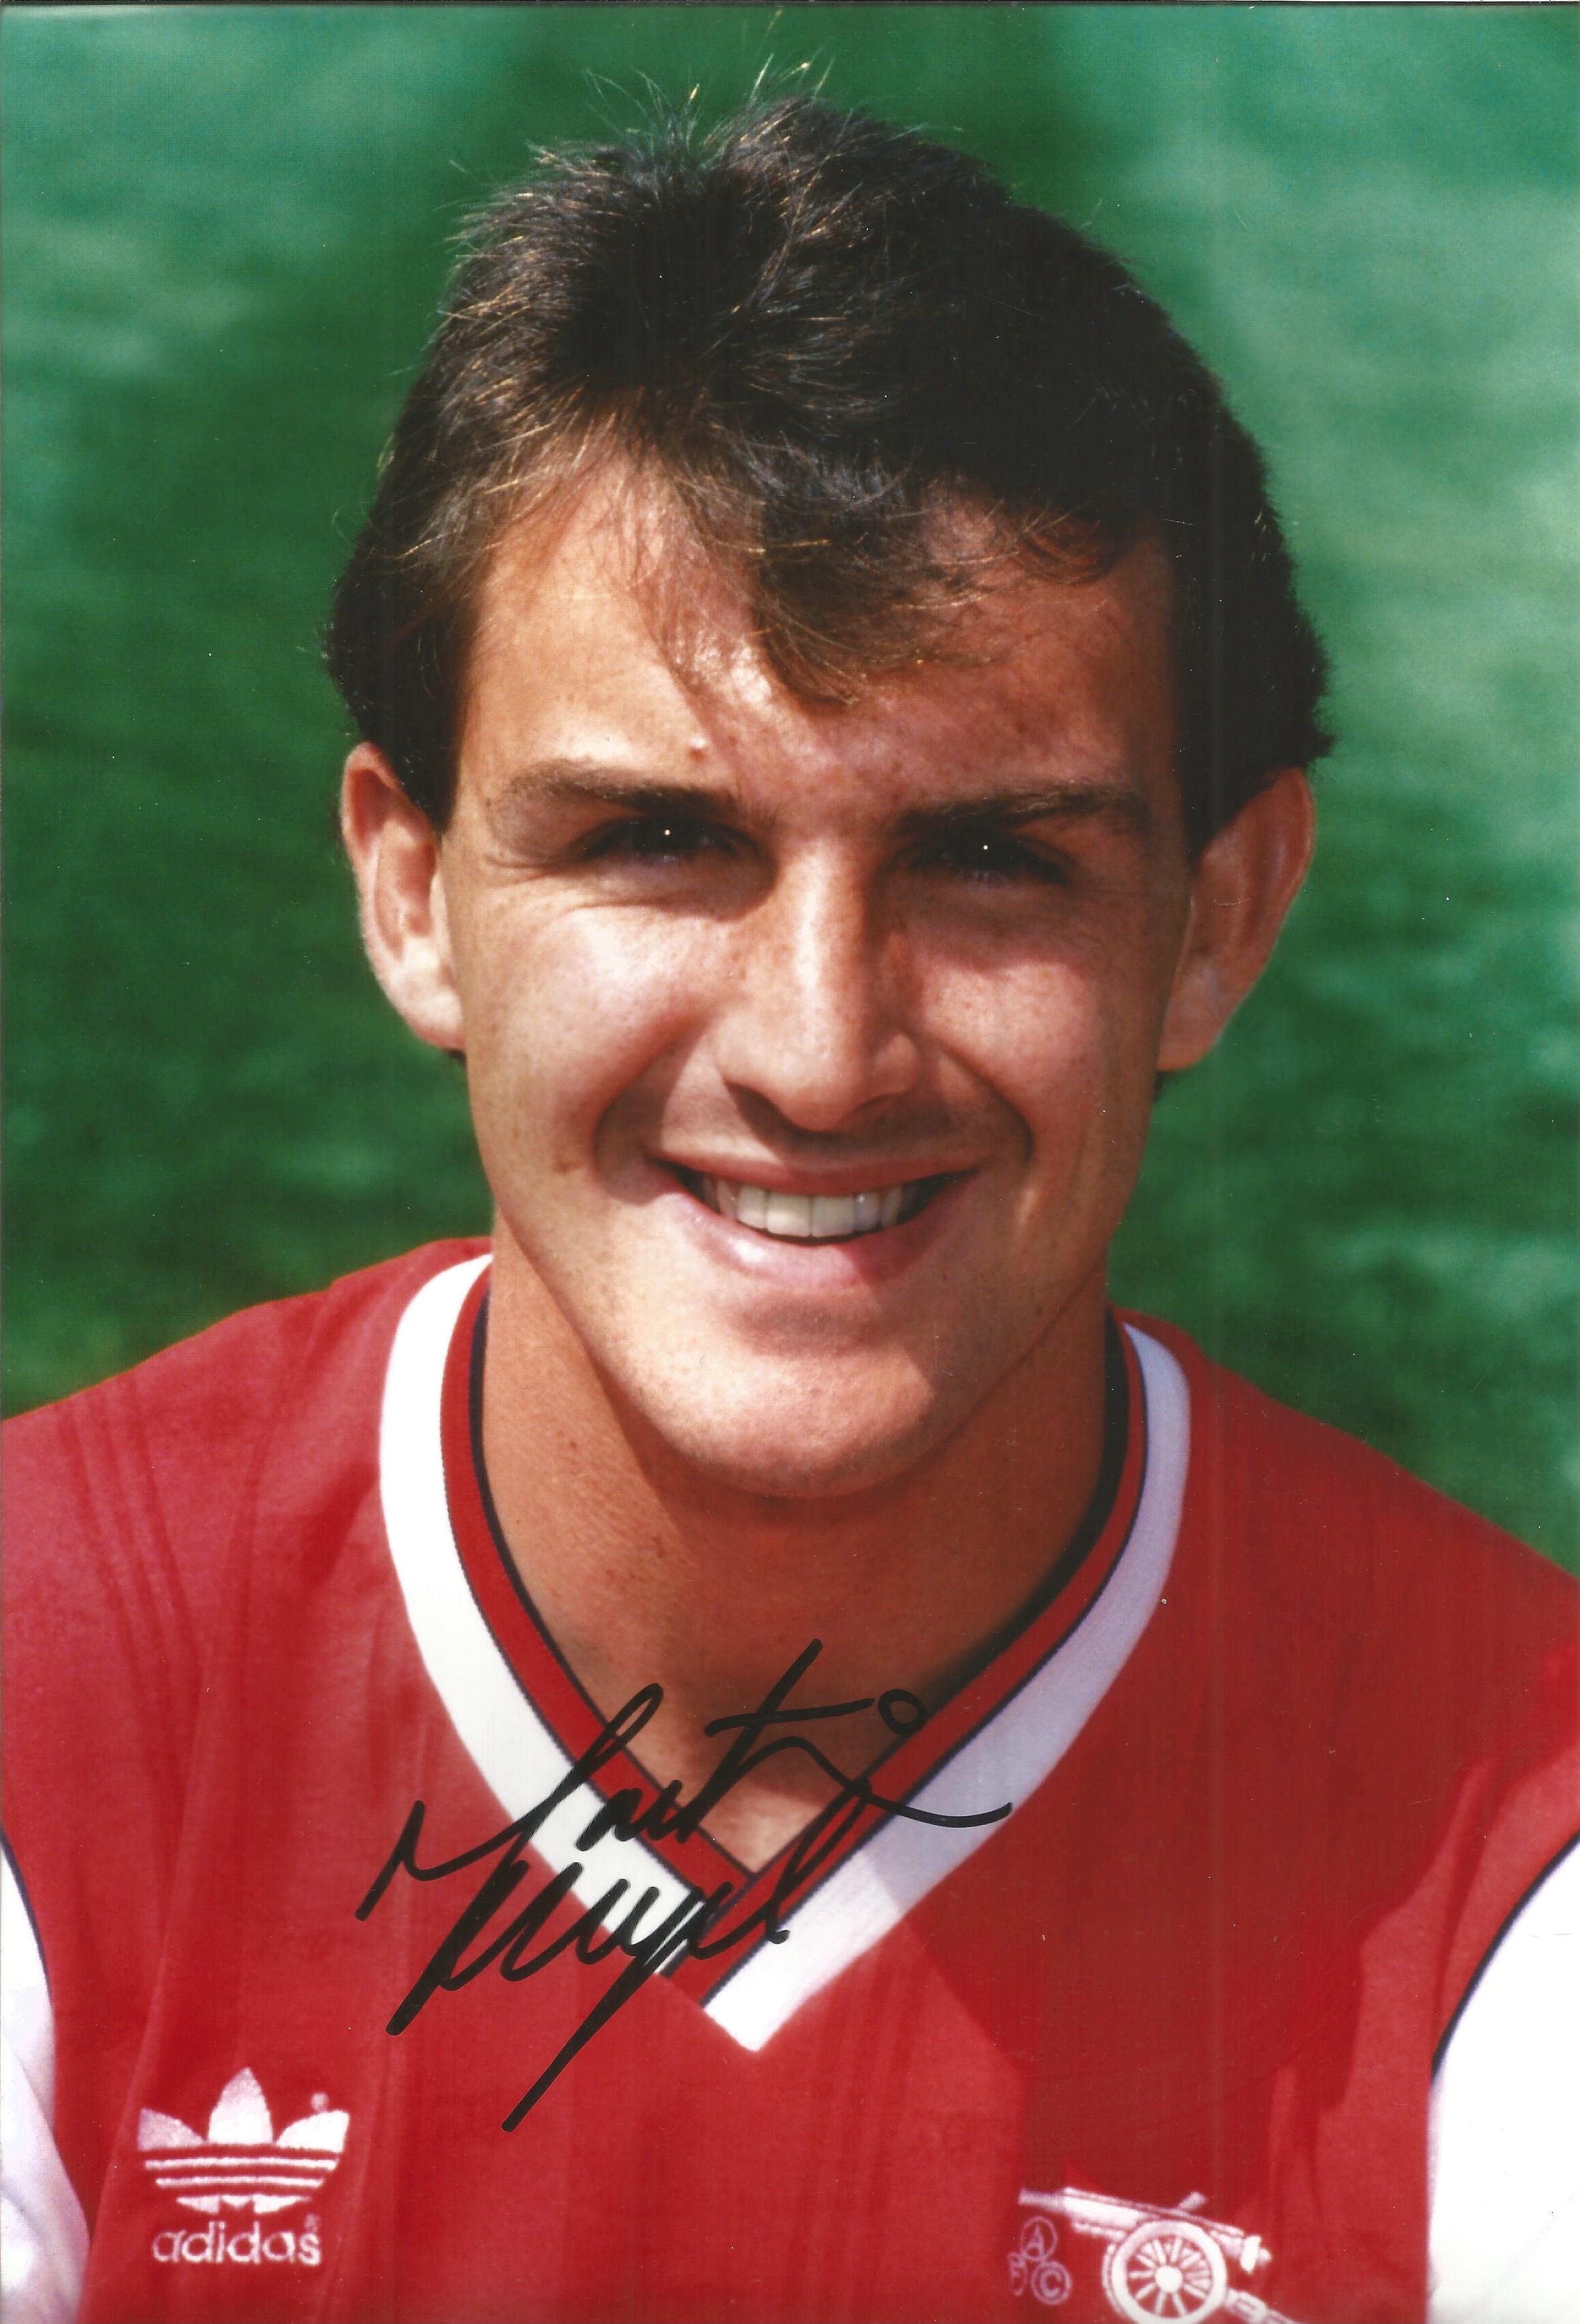 Martin Hayes Signed 8x12 Arsenal Photo. Good condition. All autographs come with a Certificate of